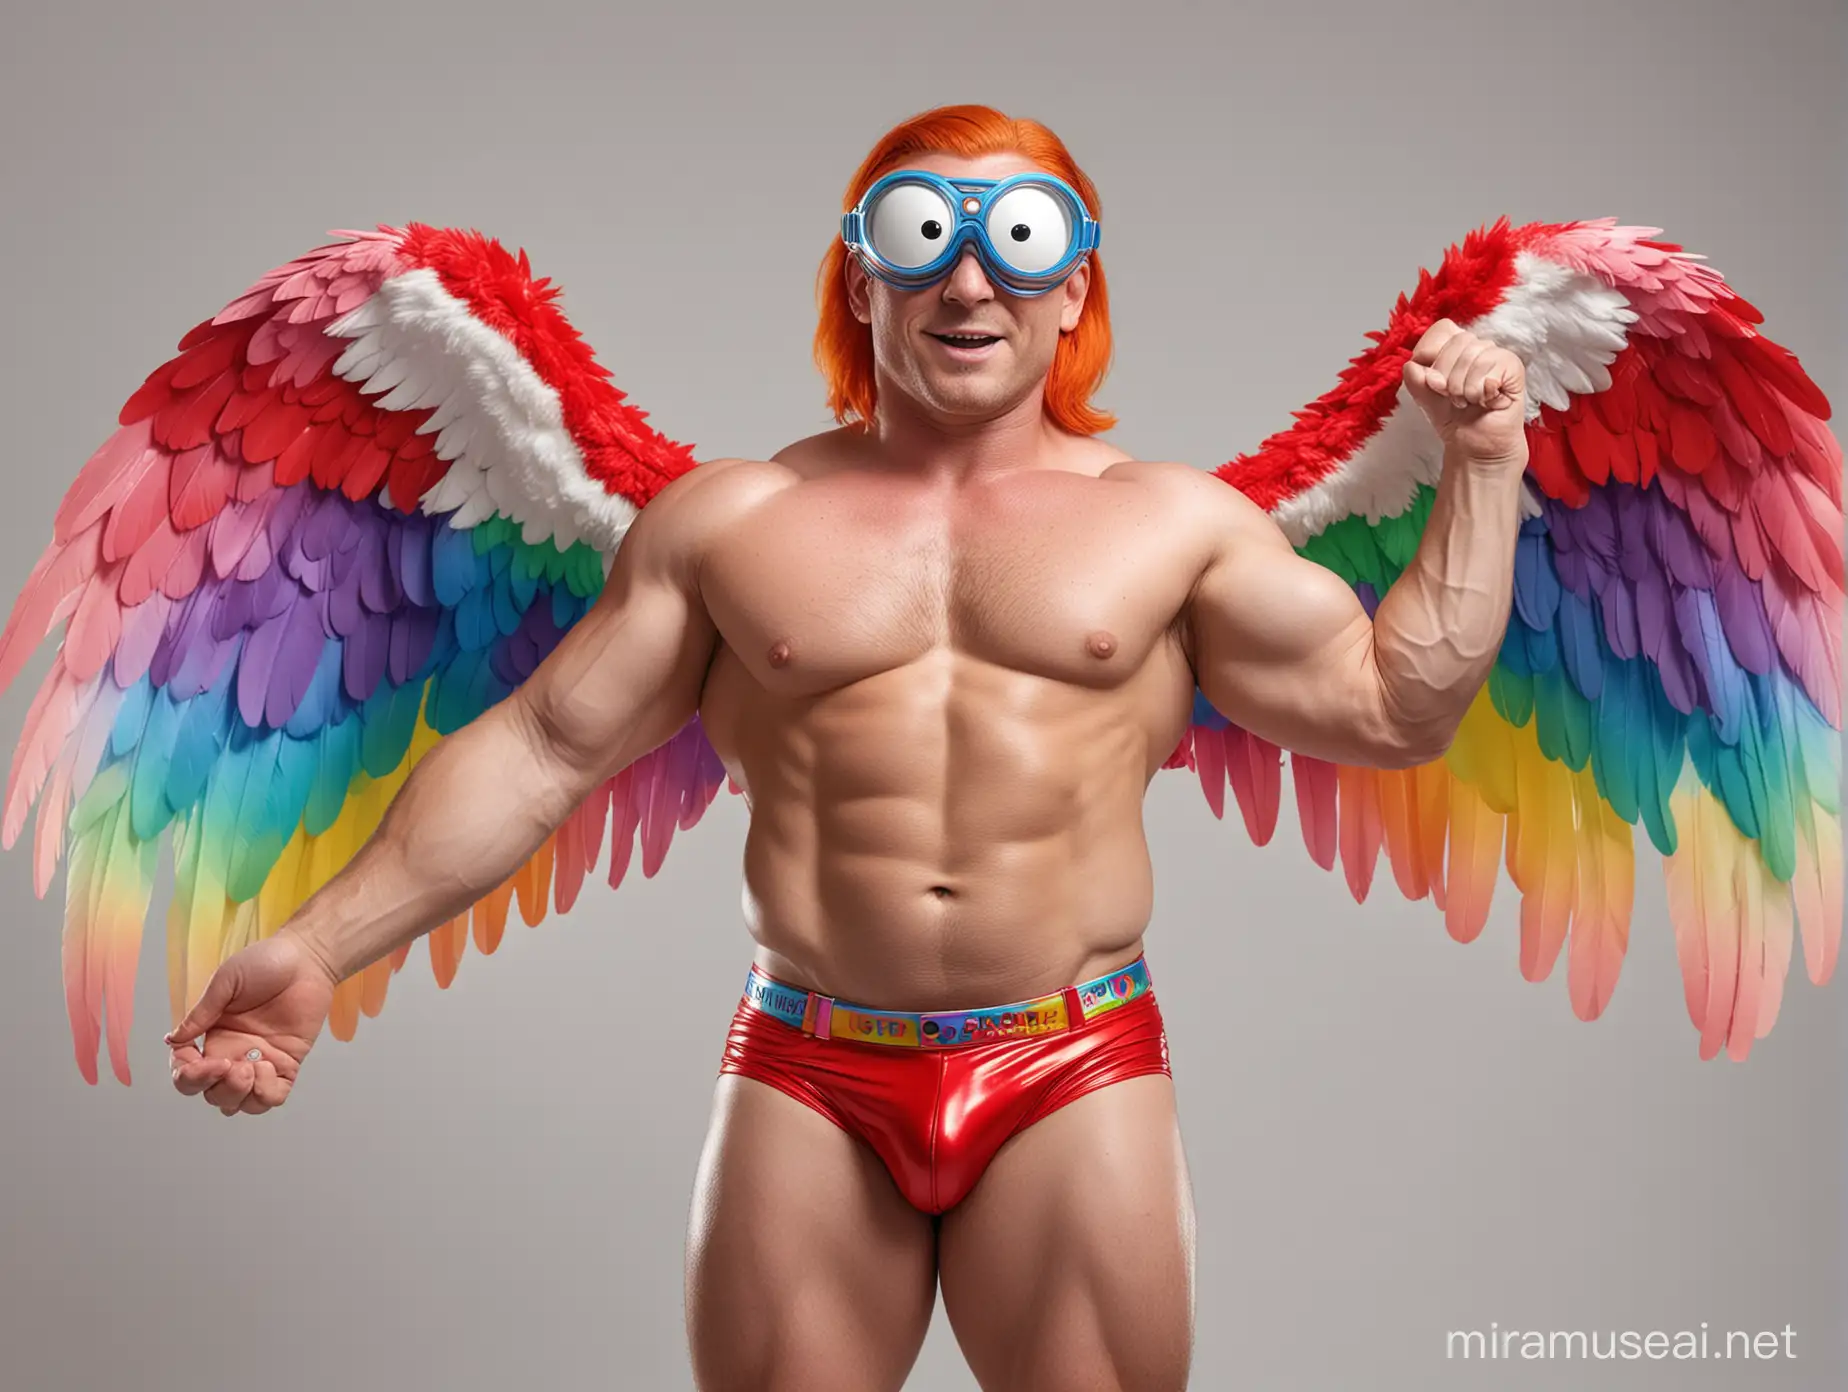 Studio Light Topless 30s Ultra Chunky Red Head Bodybuilder Daddy Wearing Multi-Highlighter Bright Rainbow Colored See Through huge Eagle Wings Shoulder Jacket short shorts and Flexing his Big Strong Arm Up with Doraemon Goggles on forehead